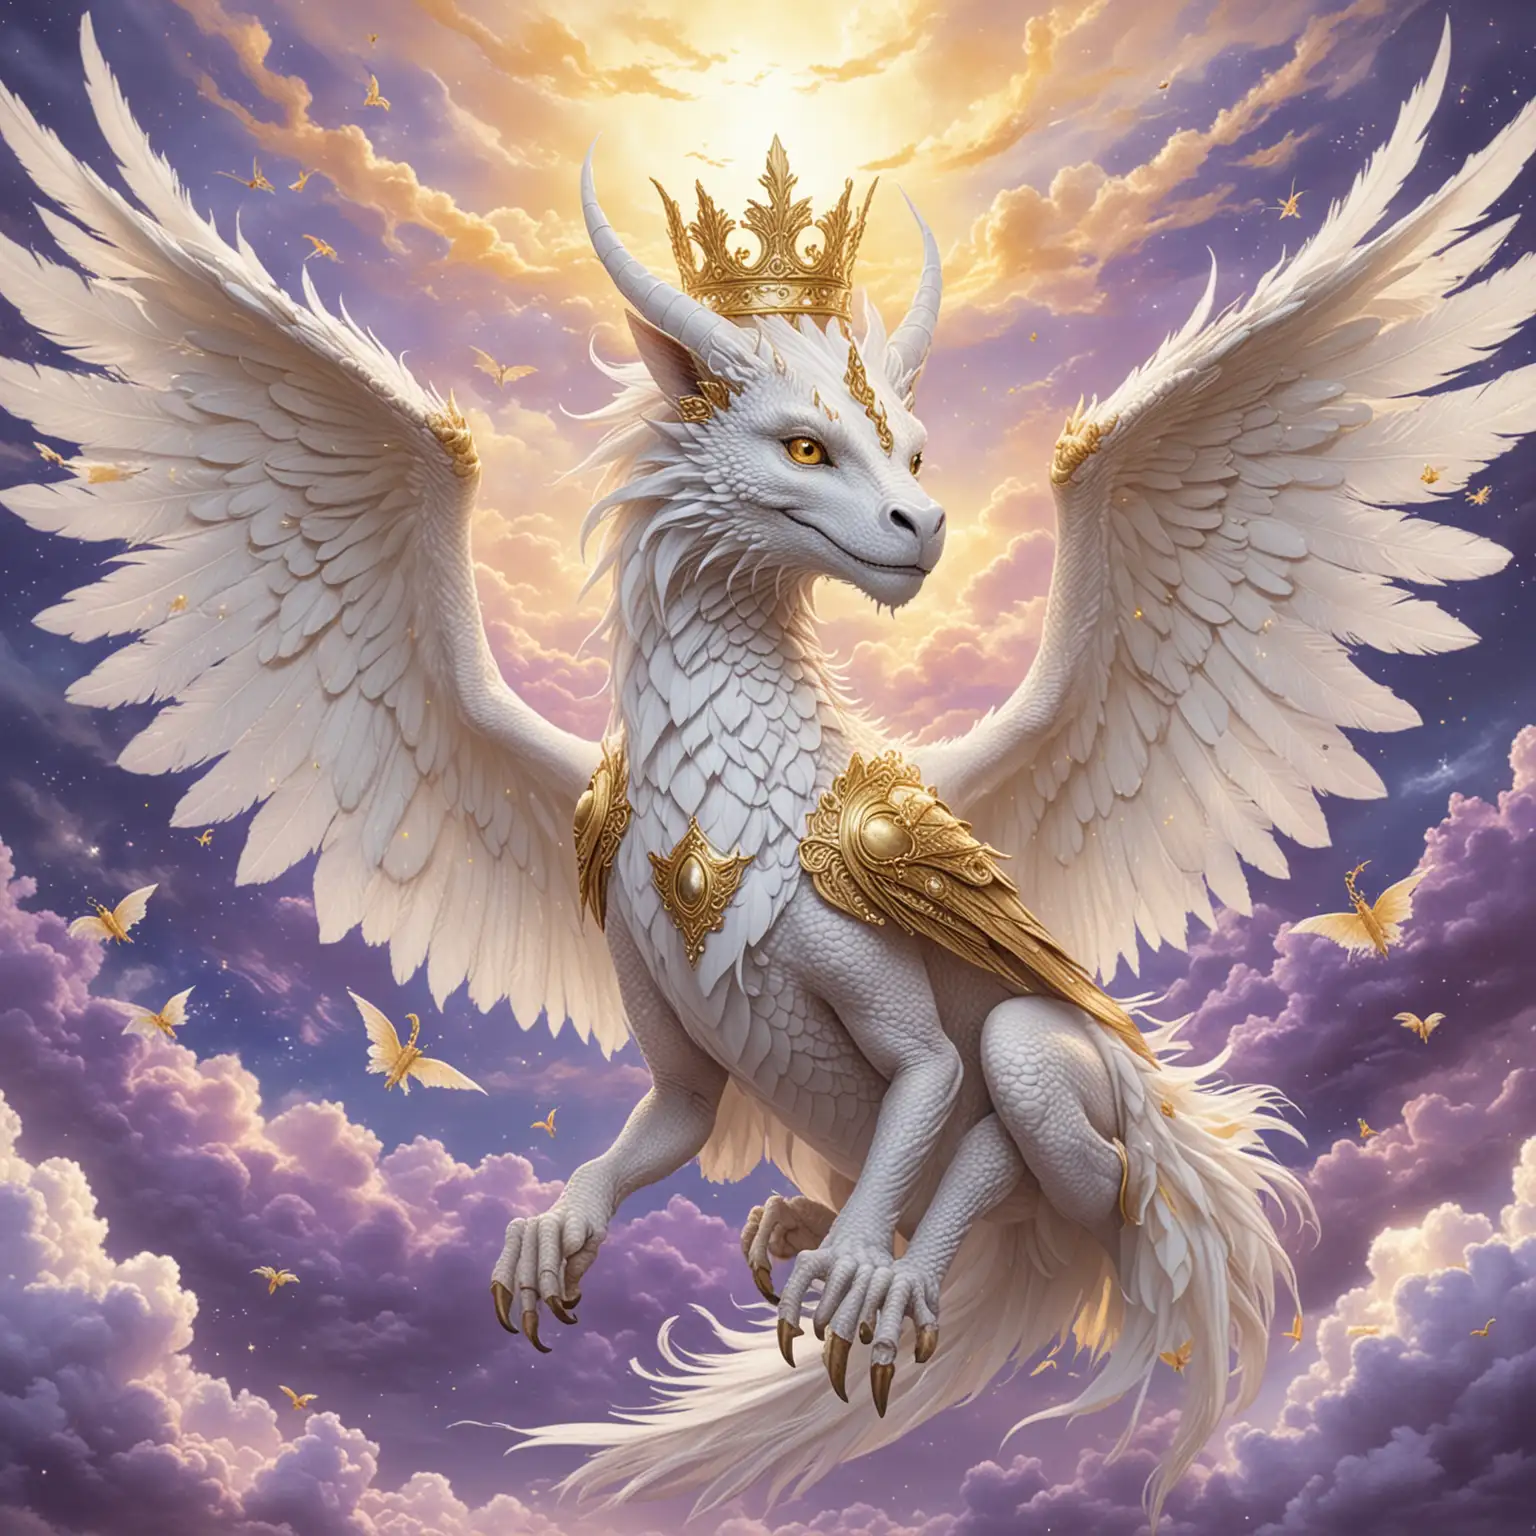 Celestial White Seraphim Dragon with Gold Crown Flying in Lavender Sky